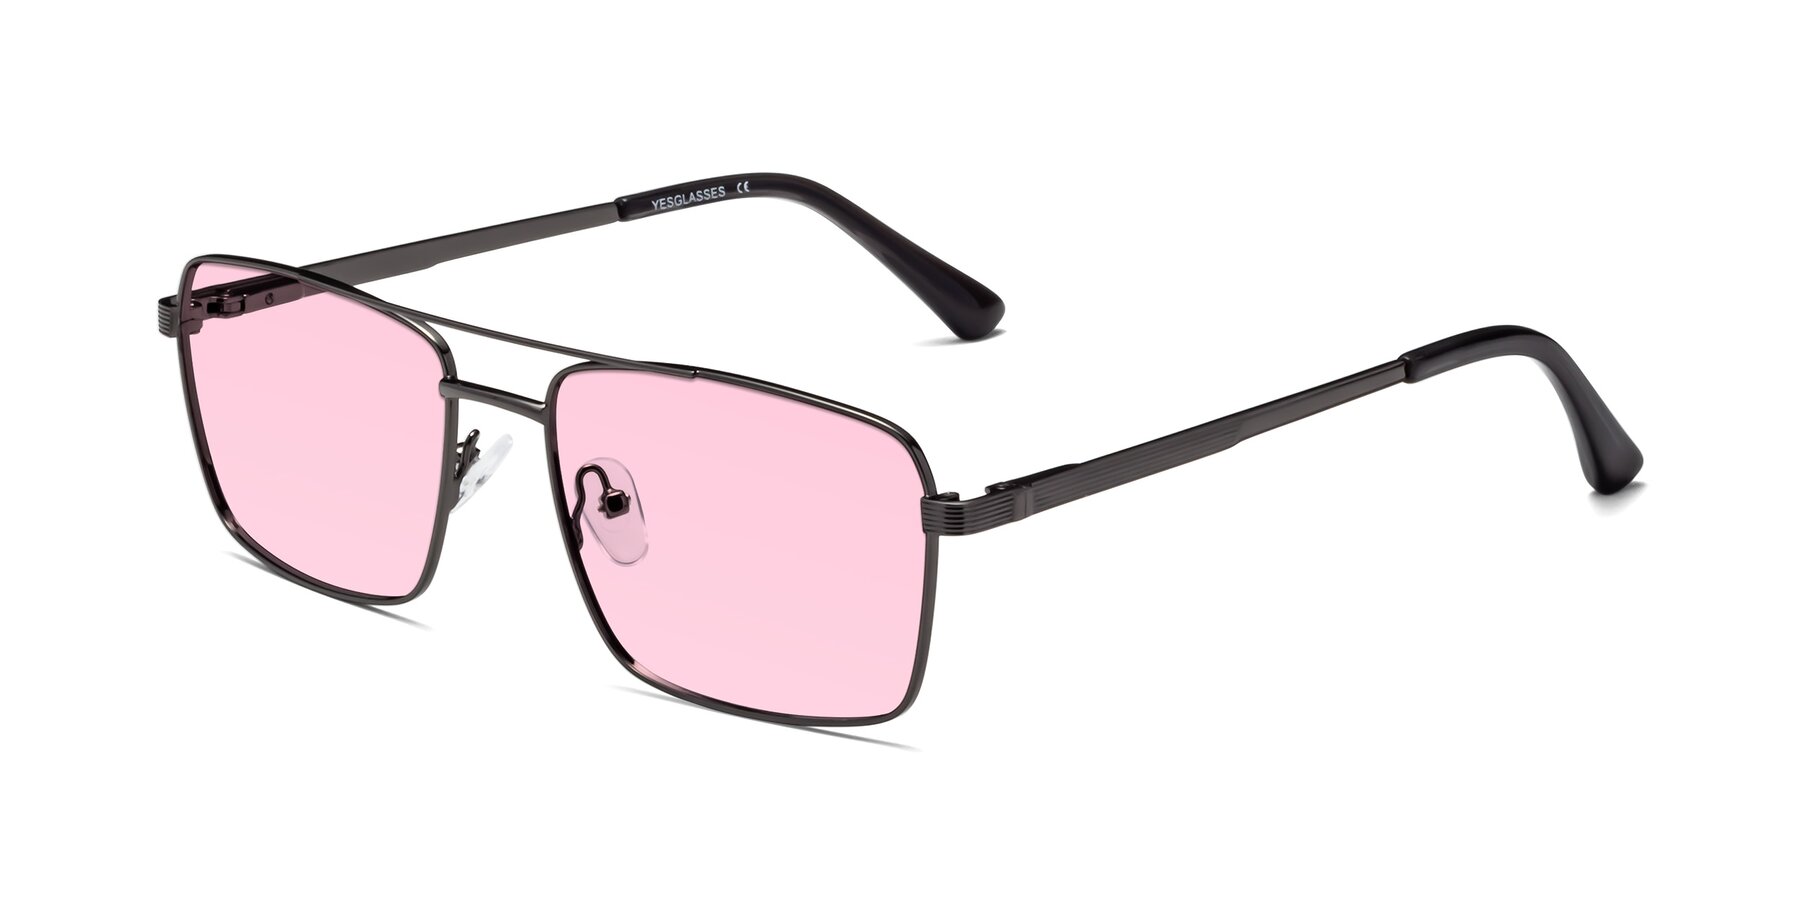 Angle of Beckum in Gunmetal with Light Pink Tinted Lenses